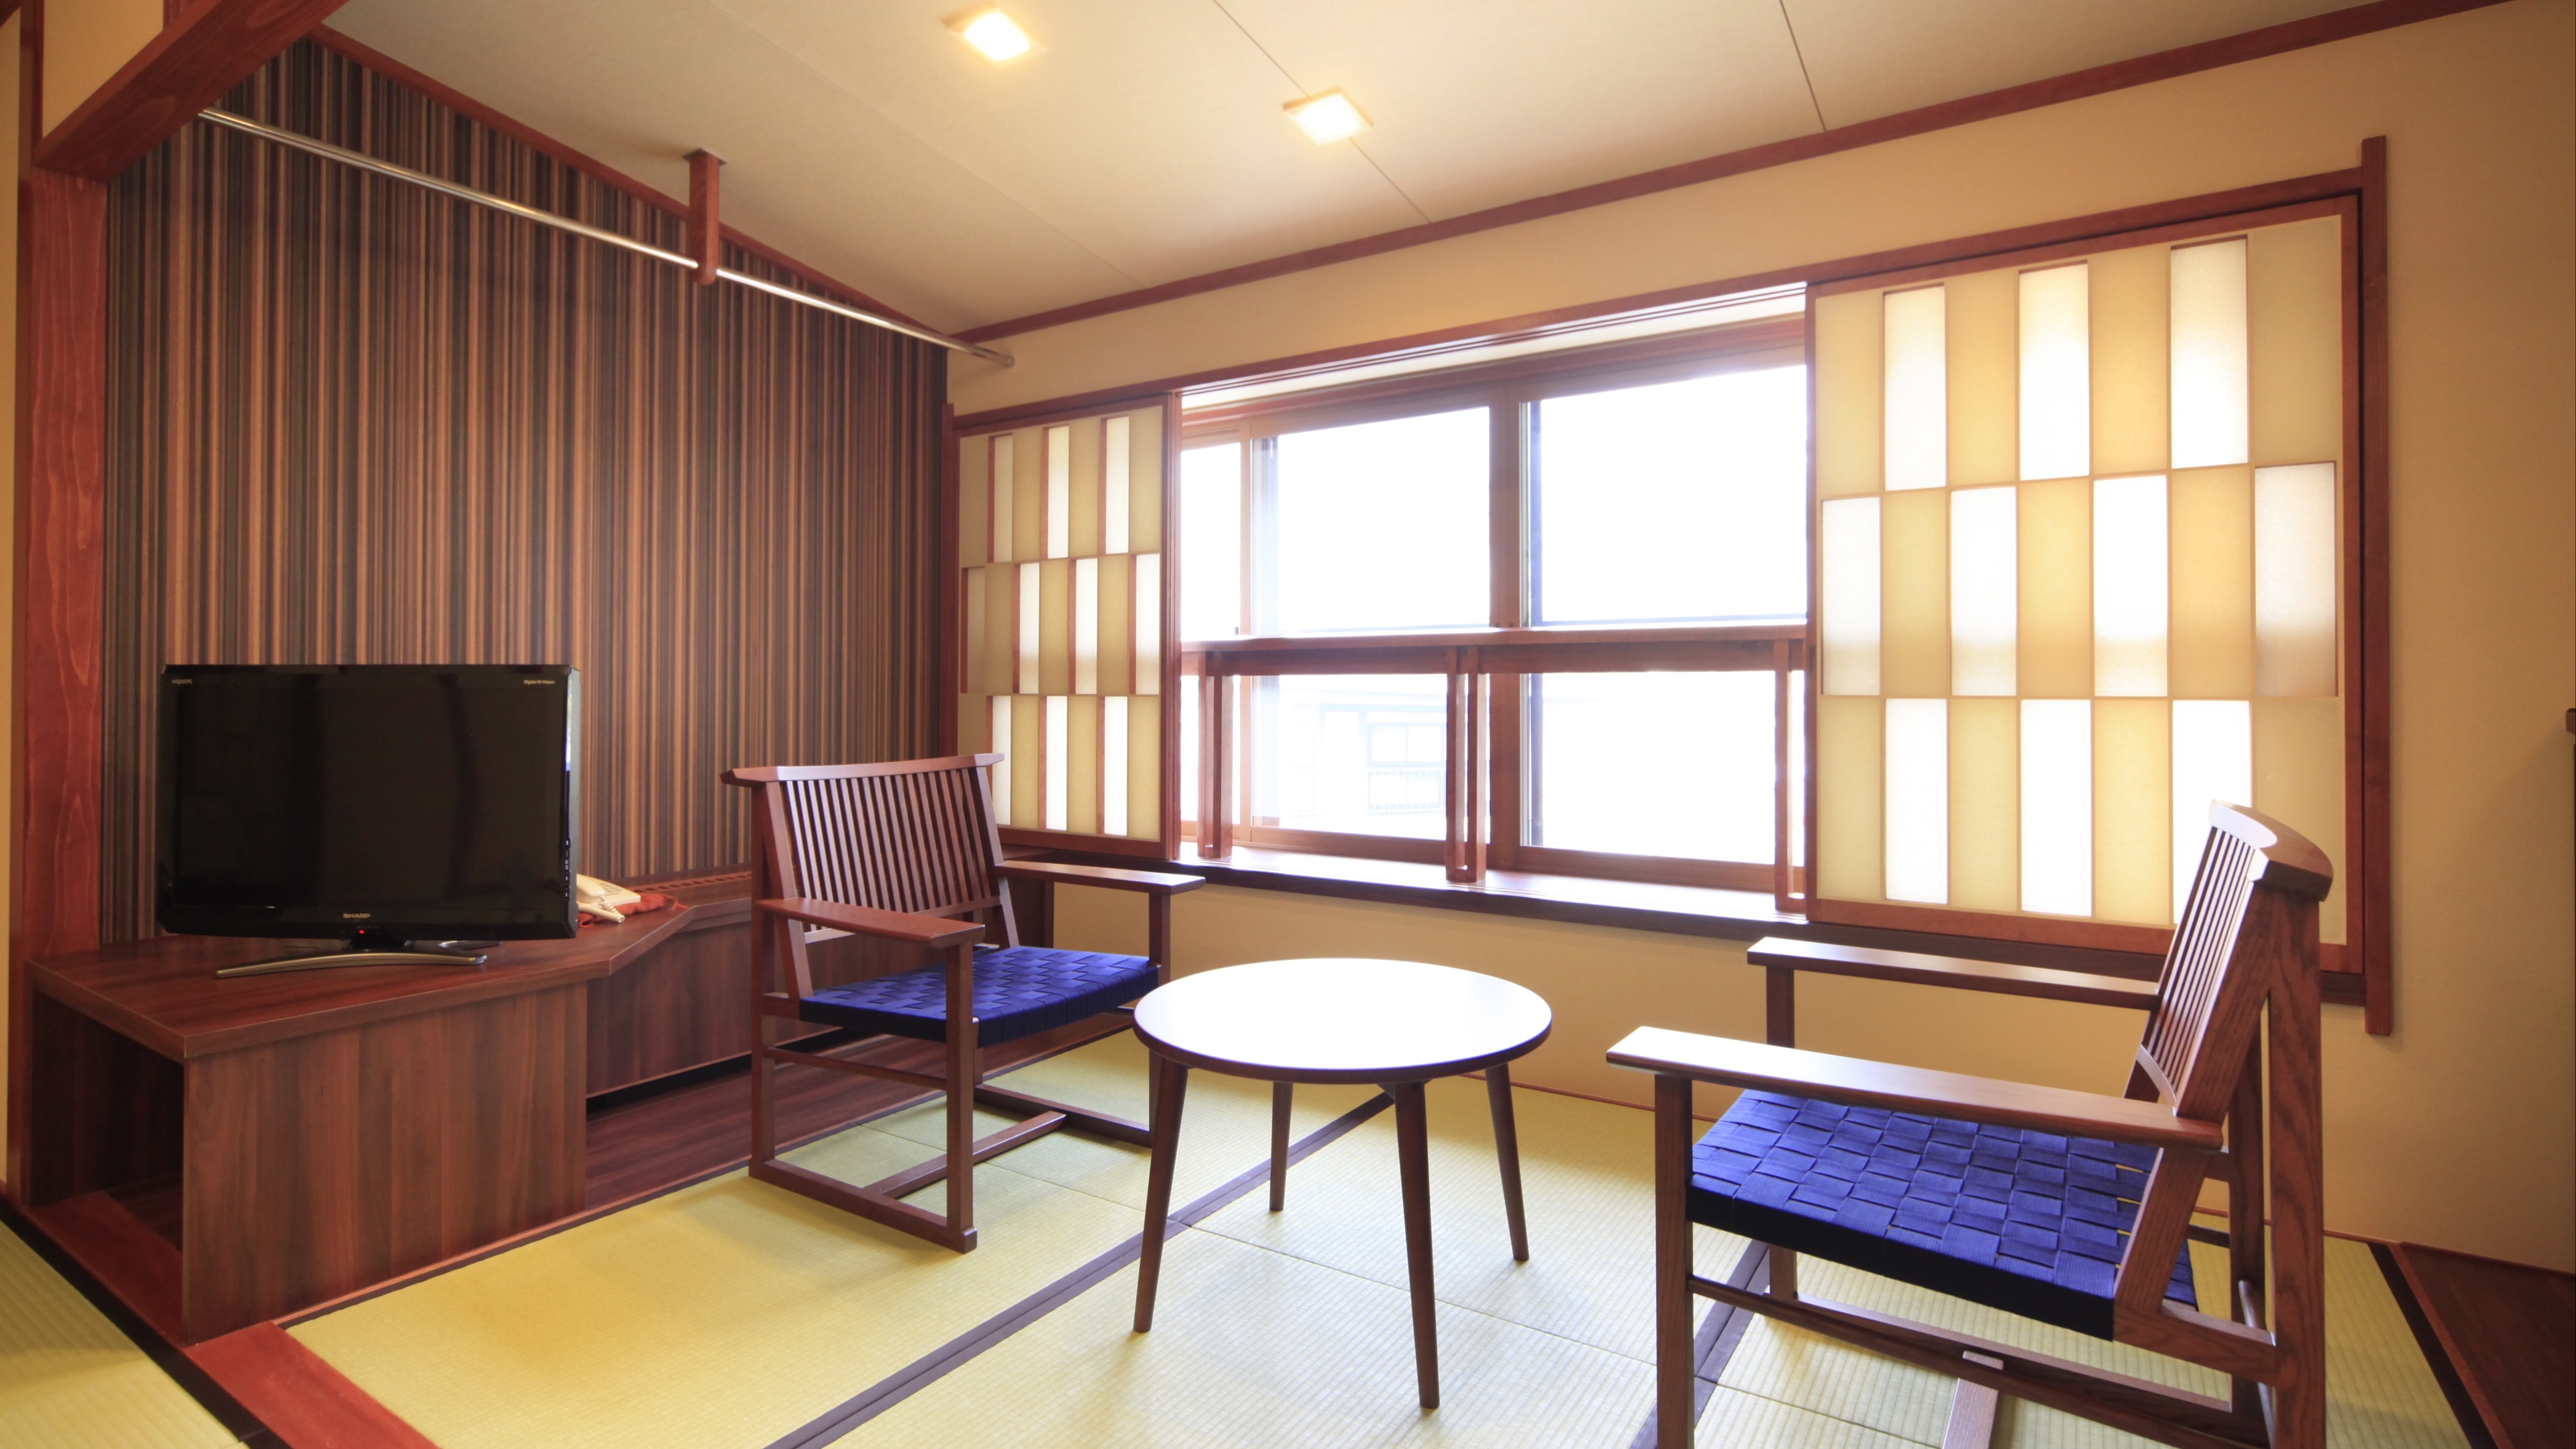 [An example of a modern Japanese-style room with 10 tatami mats]